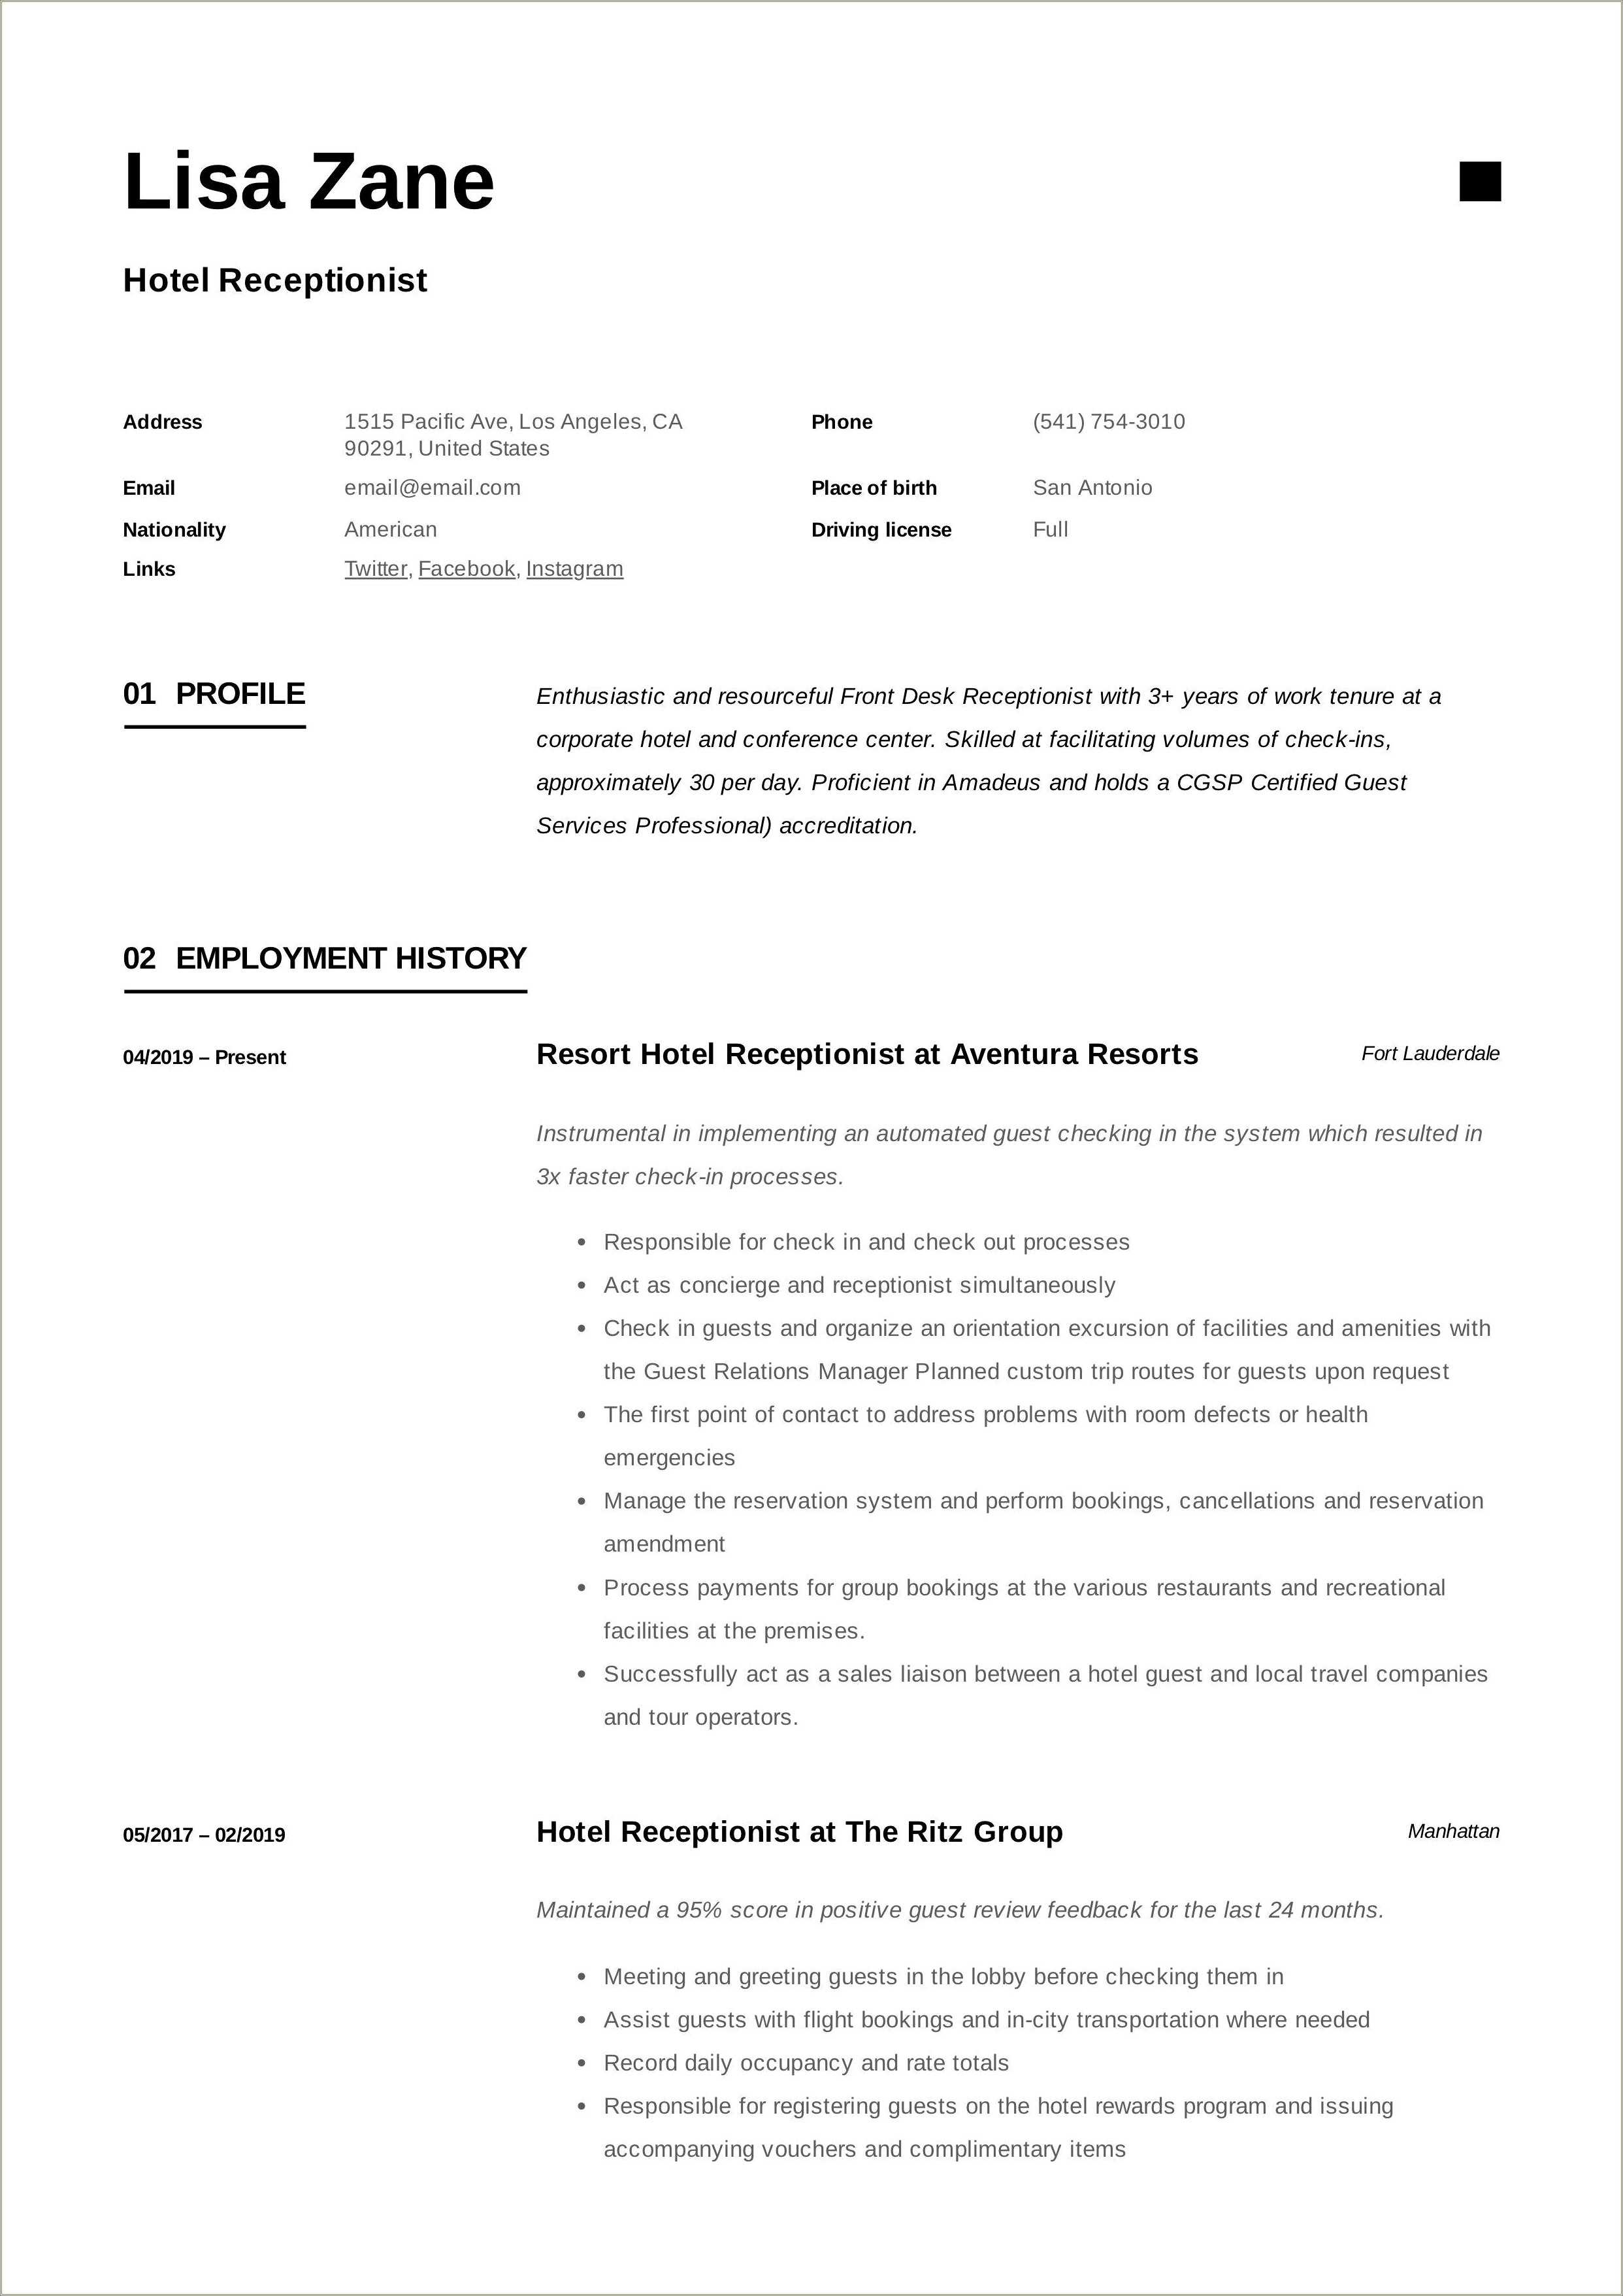 Example Of Hotel Receptionist Resume - Resume Example Gallery